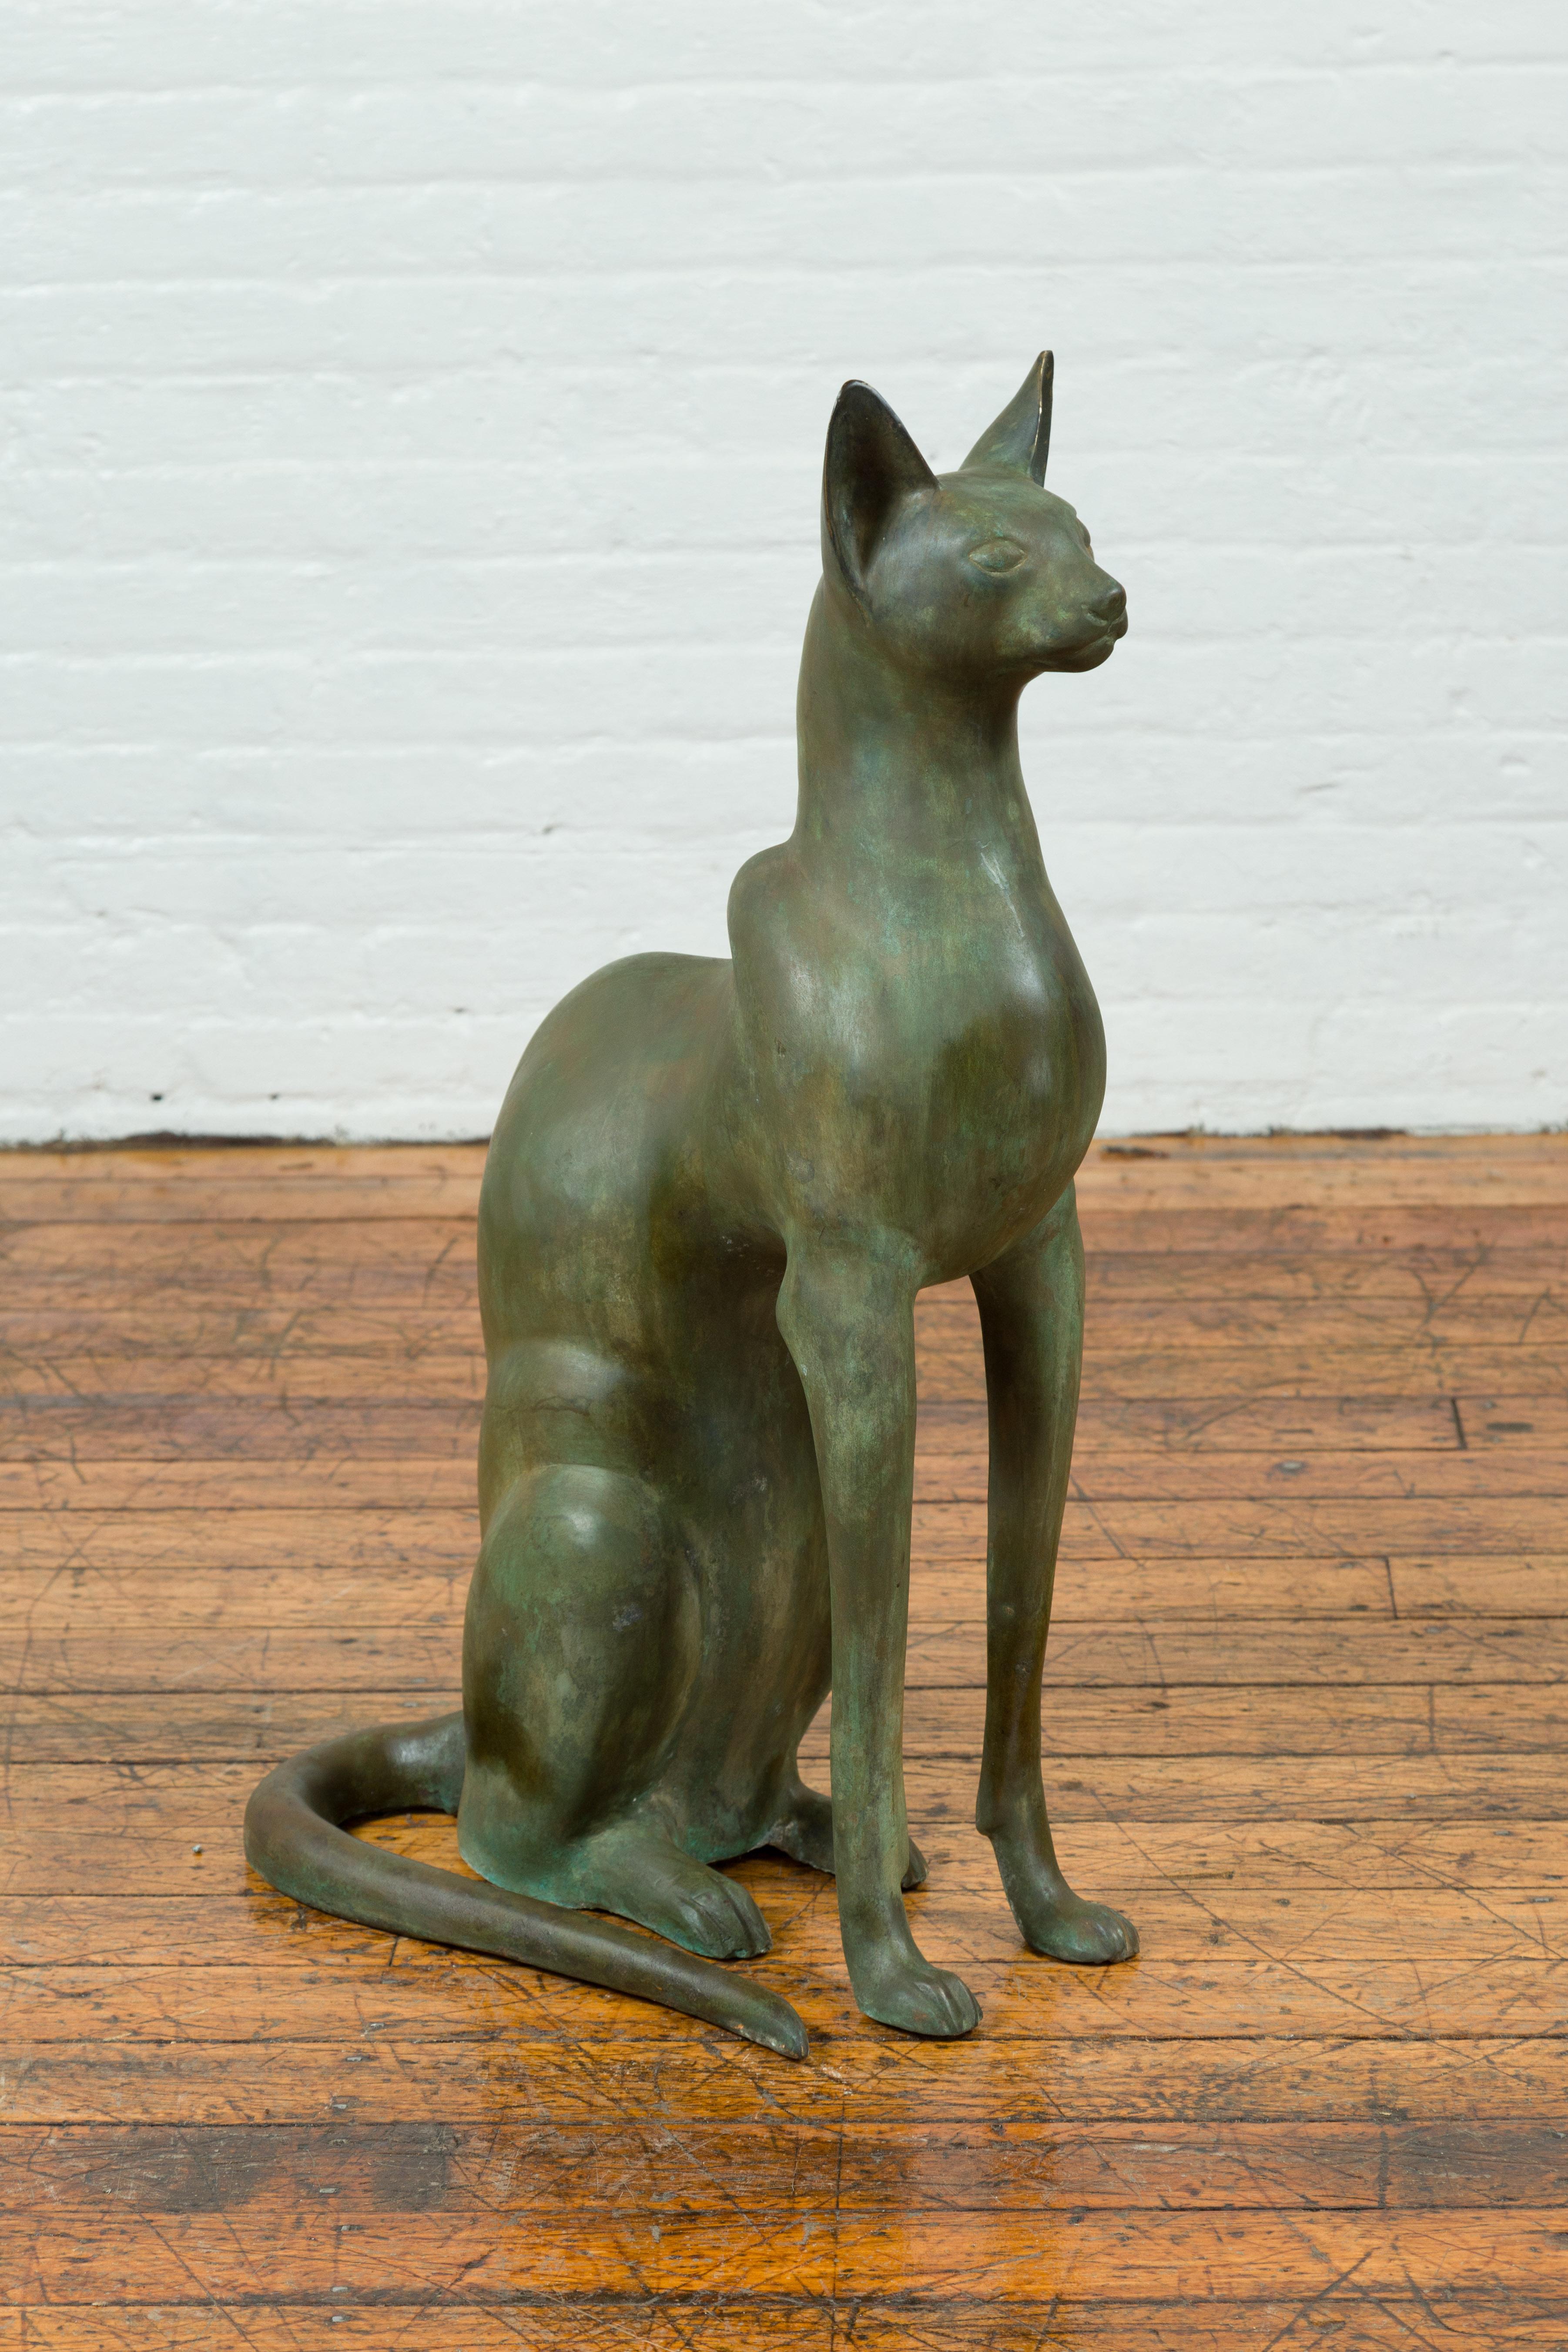 A bronze Egyptian style cat sculpture from the late 20th century. A perfect tribute to ancient Egypt's devotion for cats, this bronze sculpture draws us in with its dignified depiction of a cat measuring 31.5